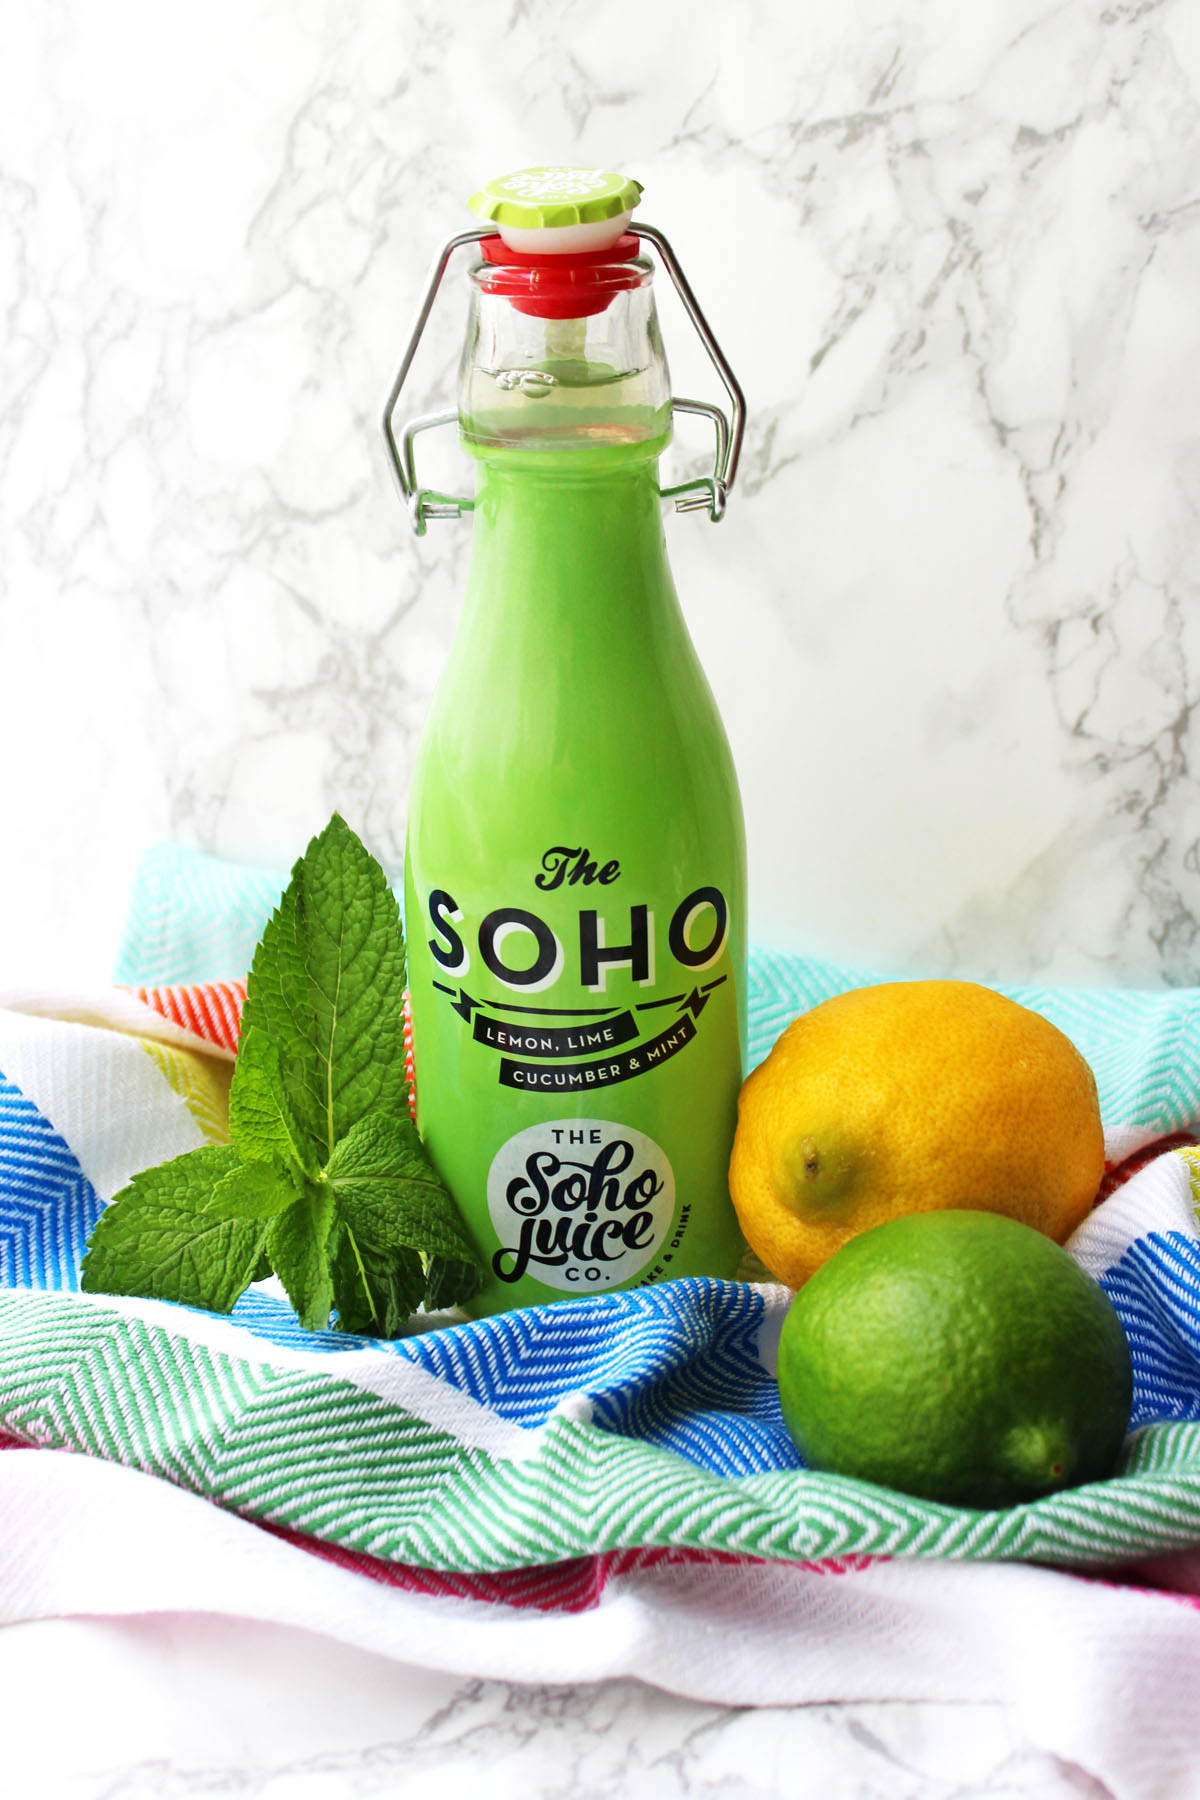 Soho Juice Co is the new kid on the soft drink block. Made with cucumber. citrus and mint it's a really refreshing drink!